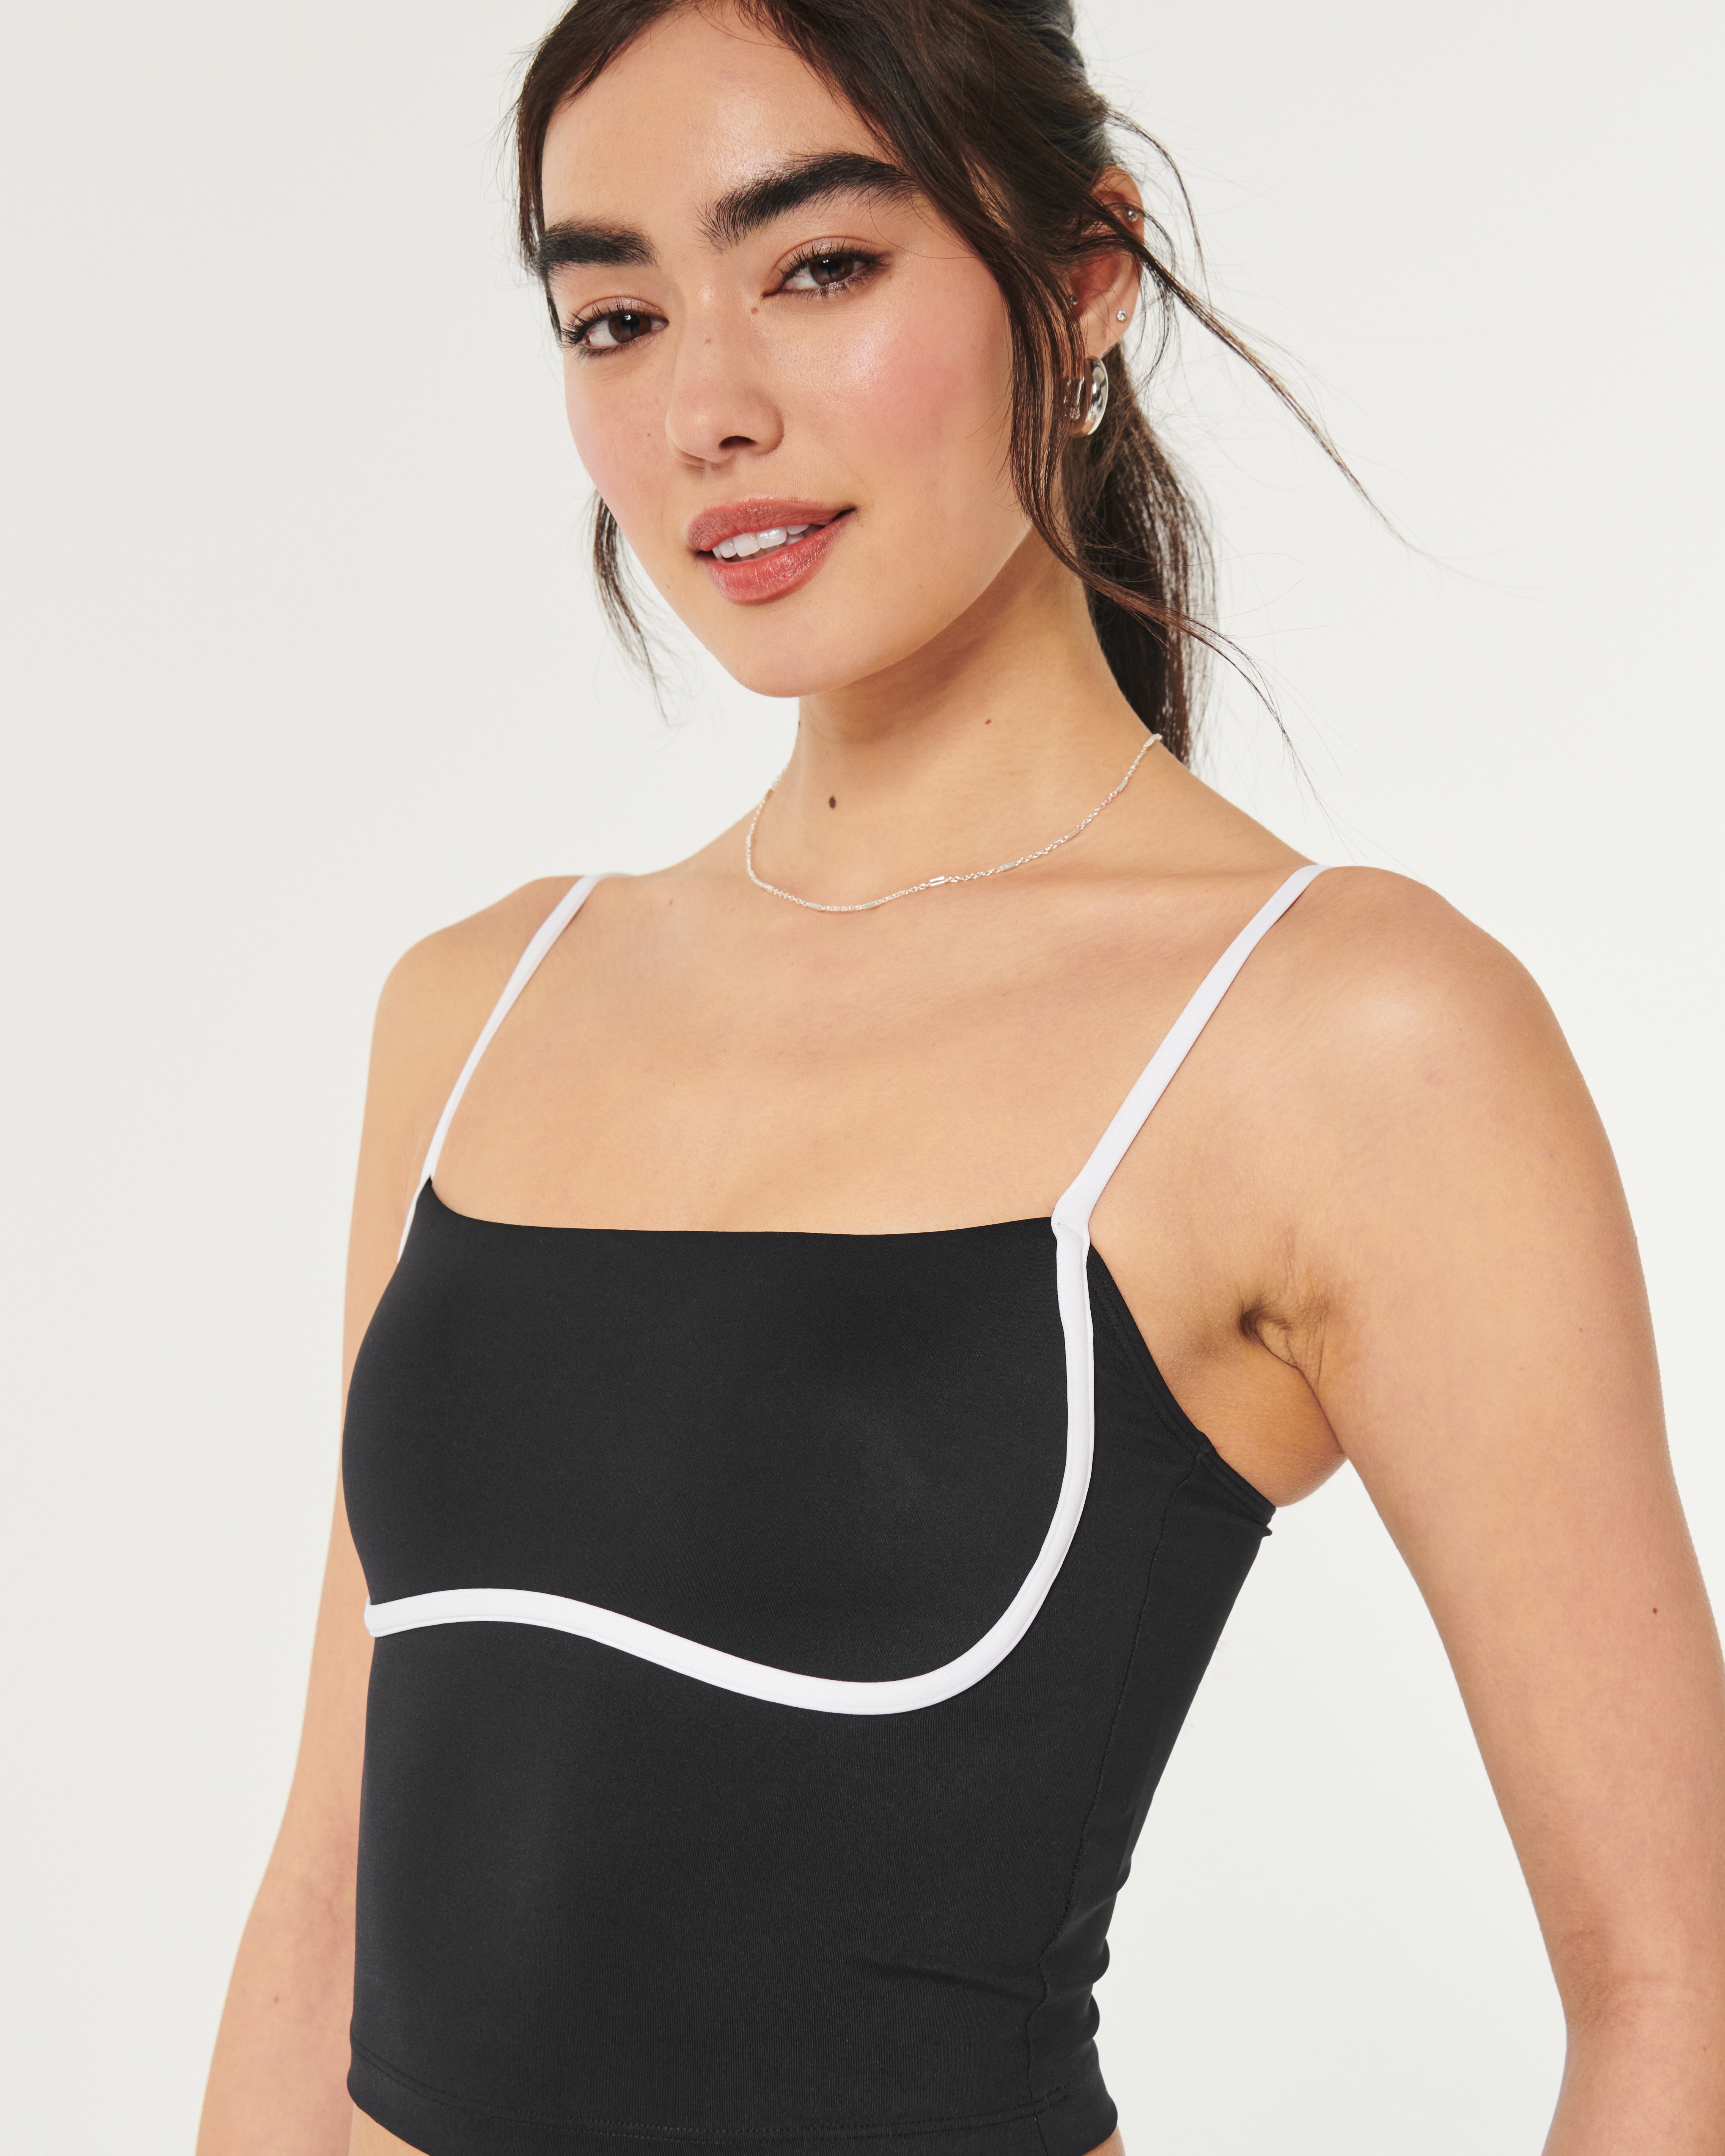 Gilly Hicks Active Energize Under-Bust Tank